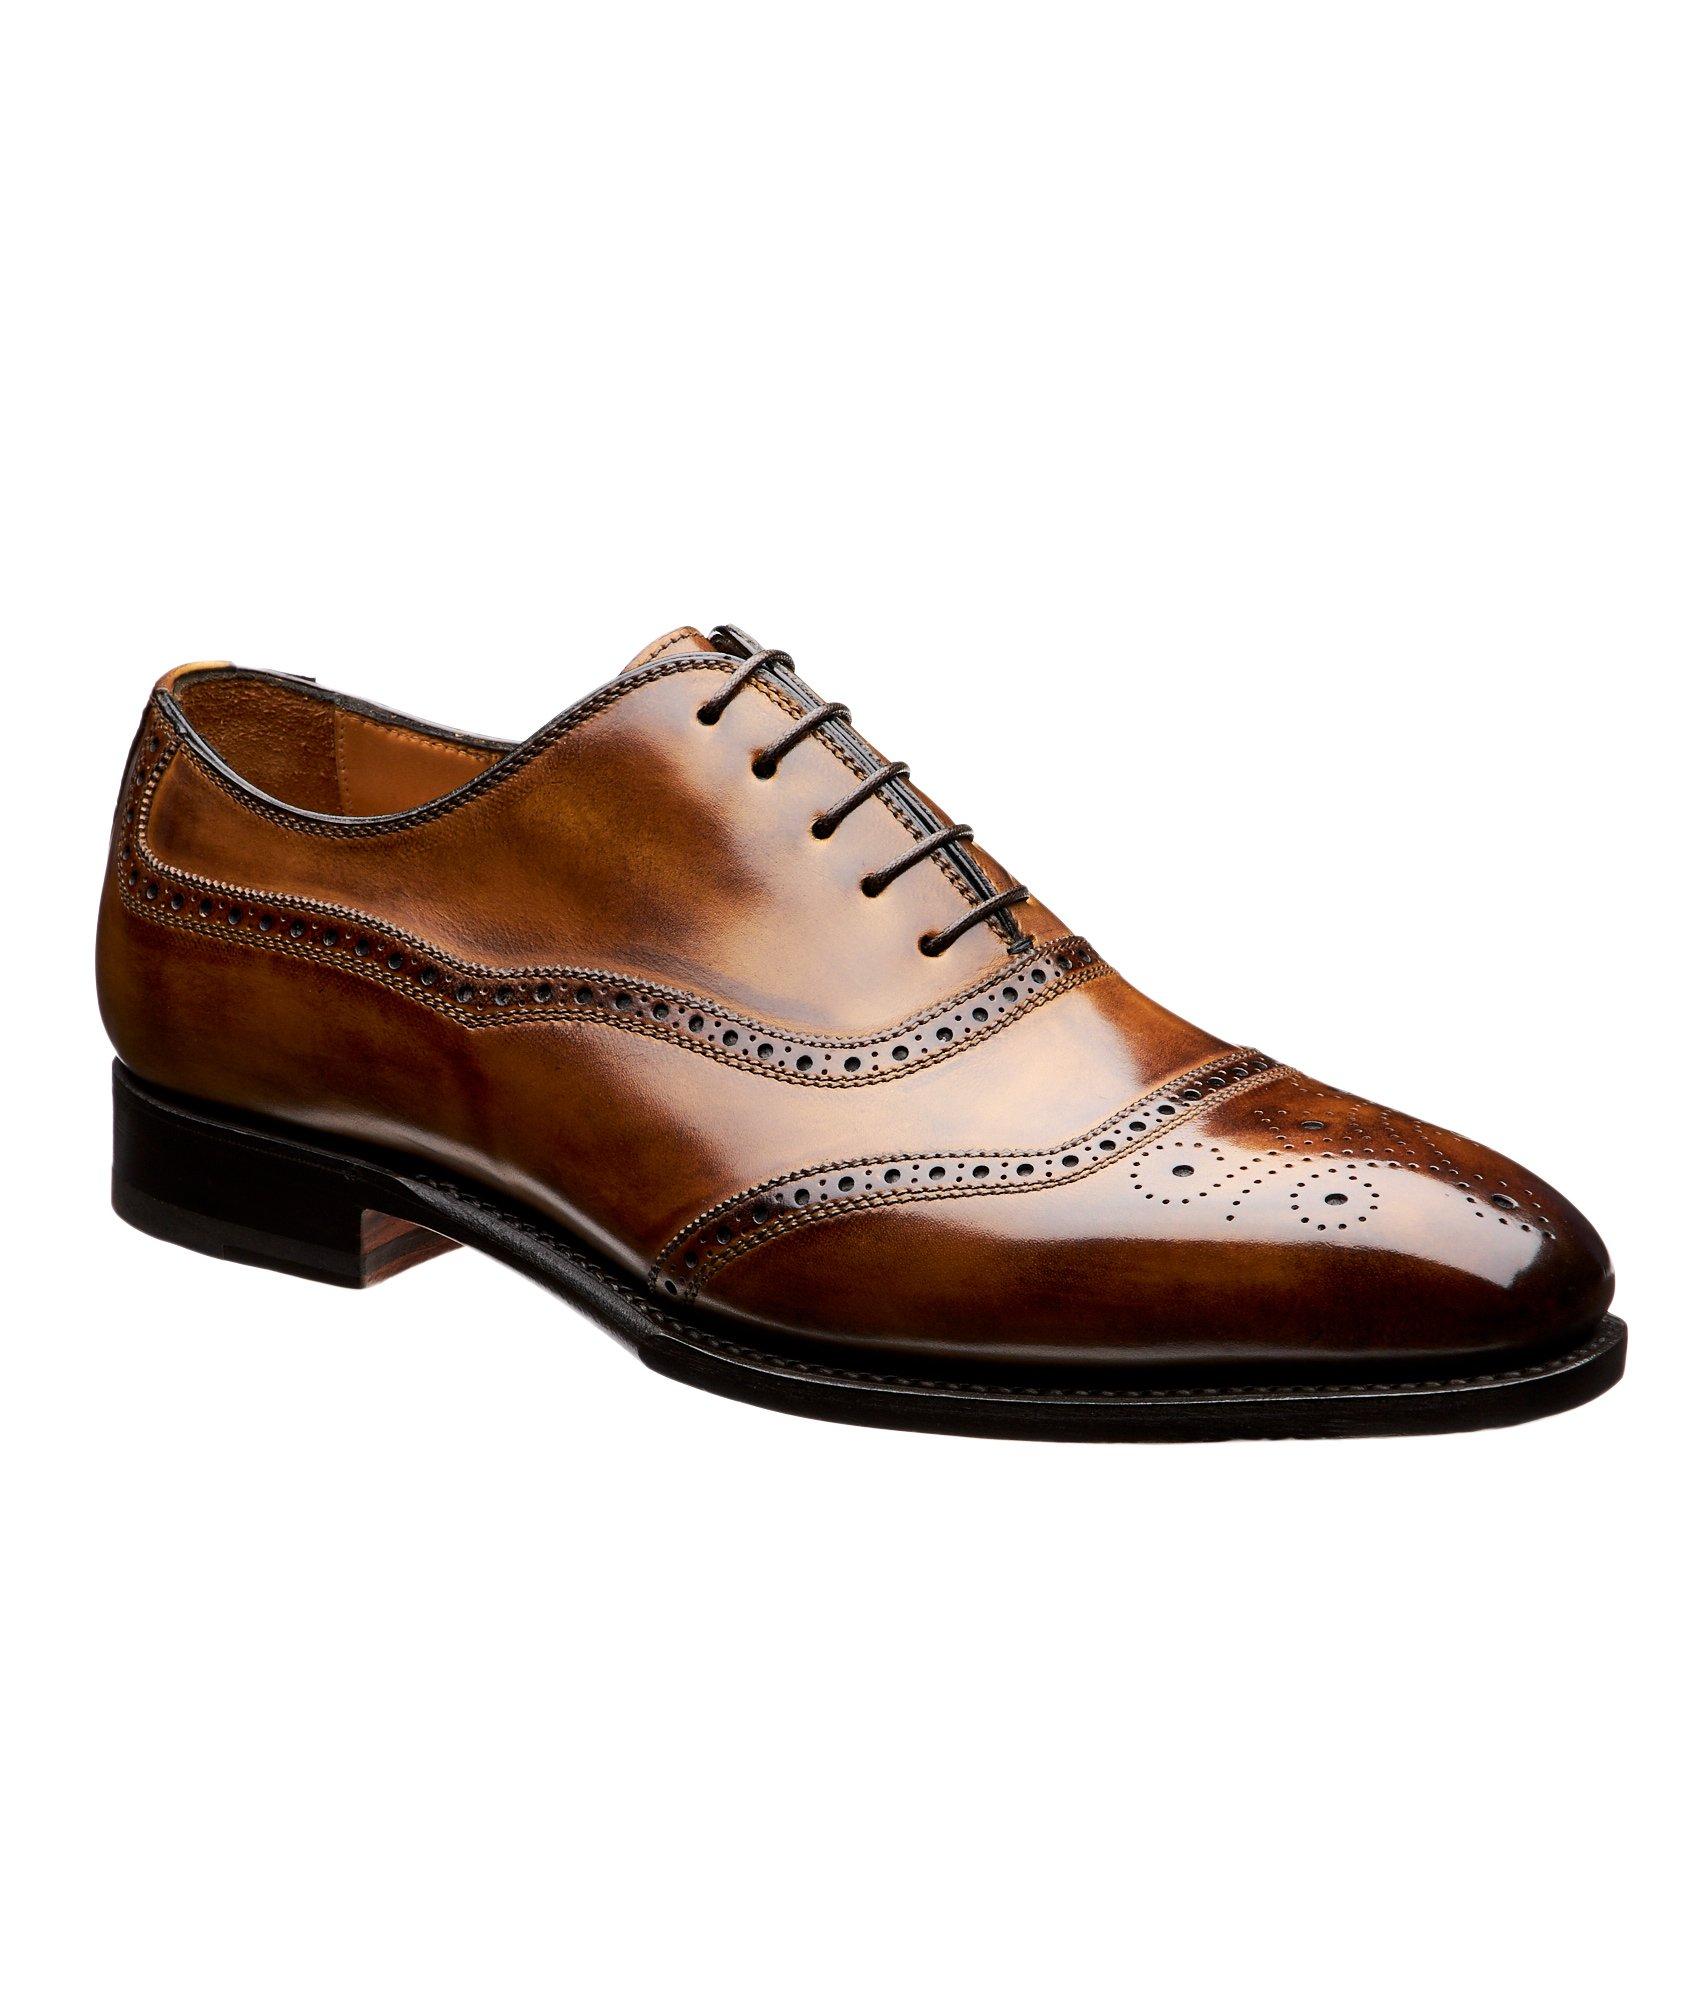 Embossed Cap-Toe Leather Oxfords image 0